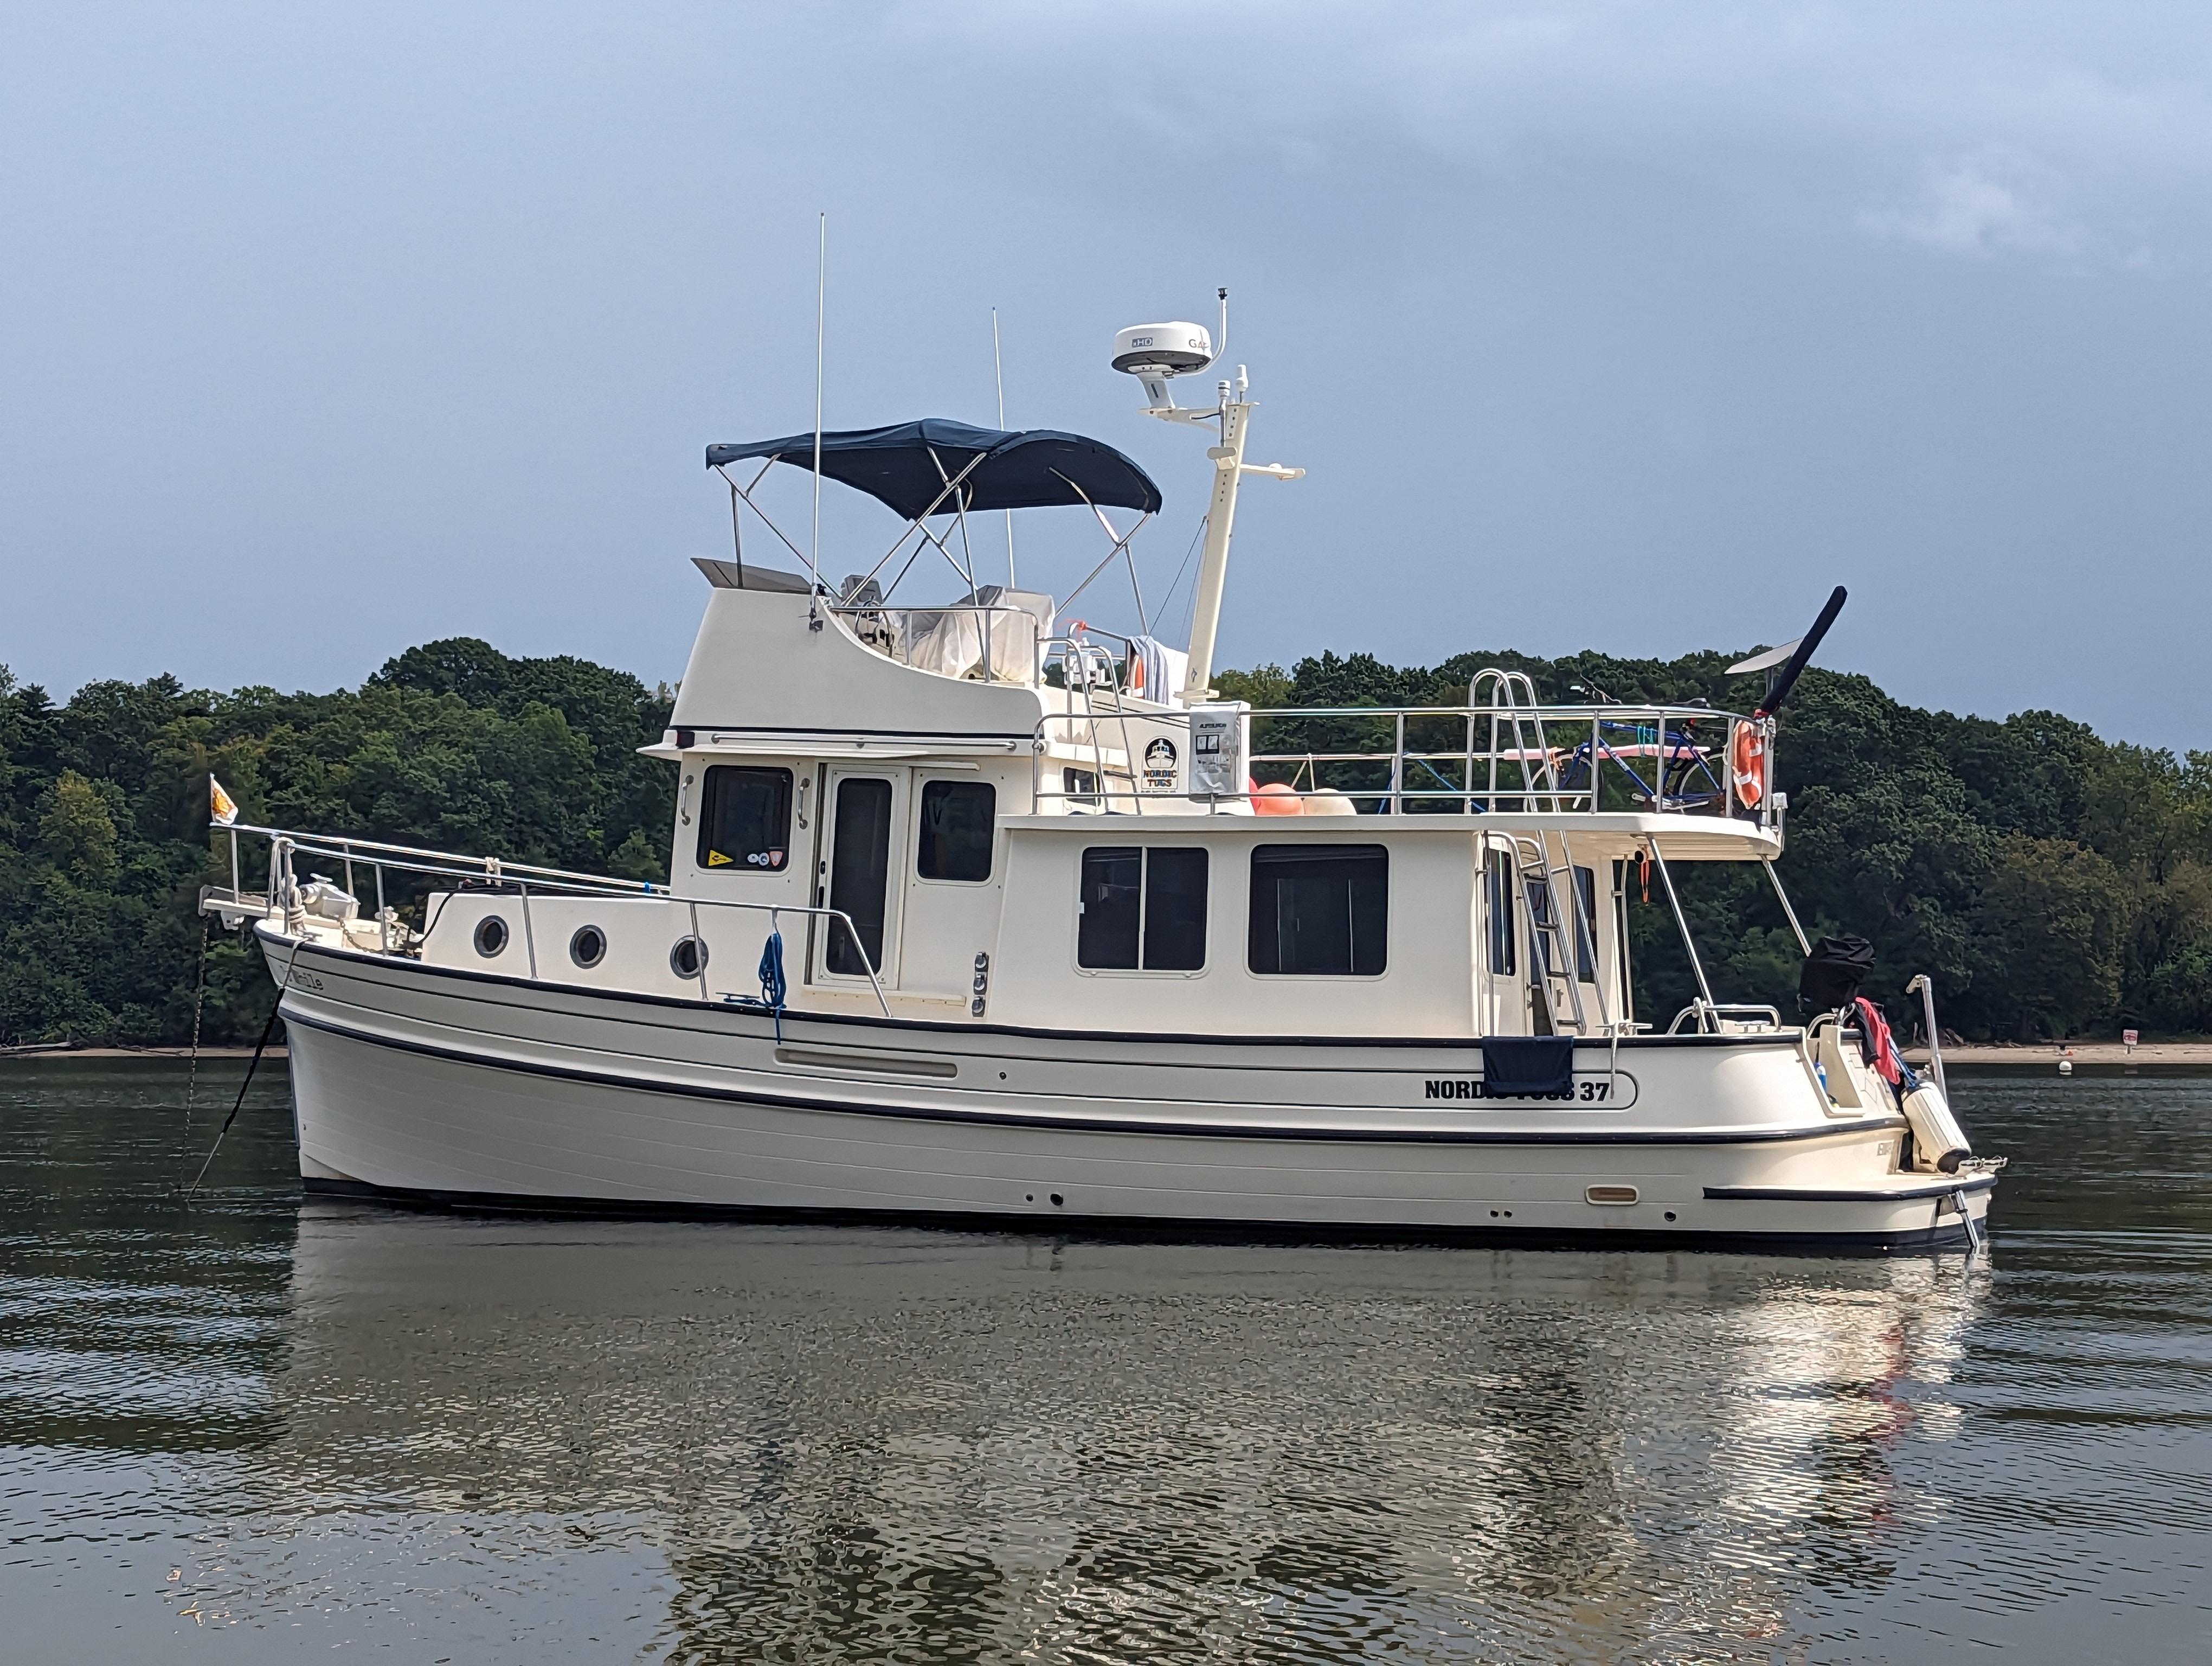 Do While Yacht for Sale, 37 Nordic Tug Yachts Newington, NH